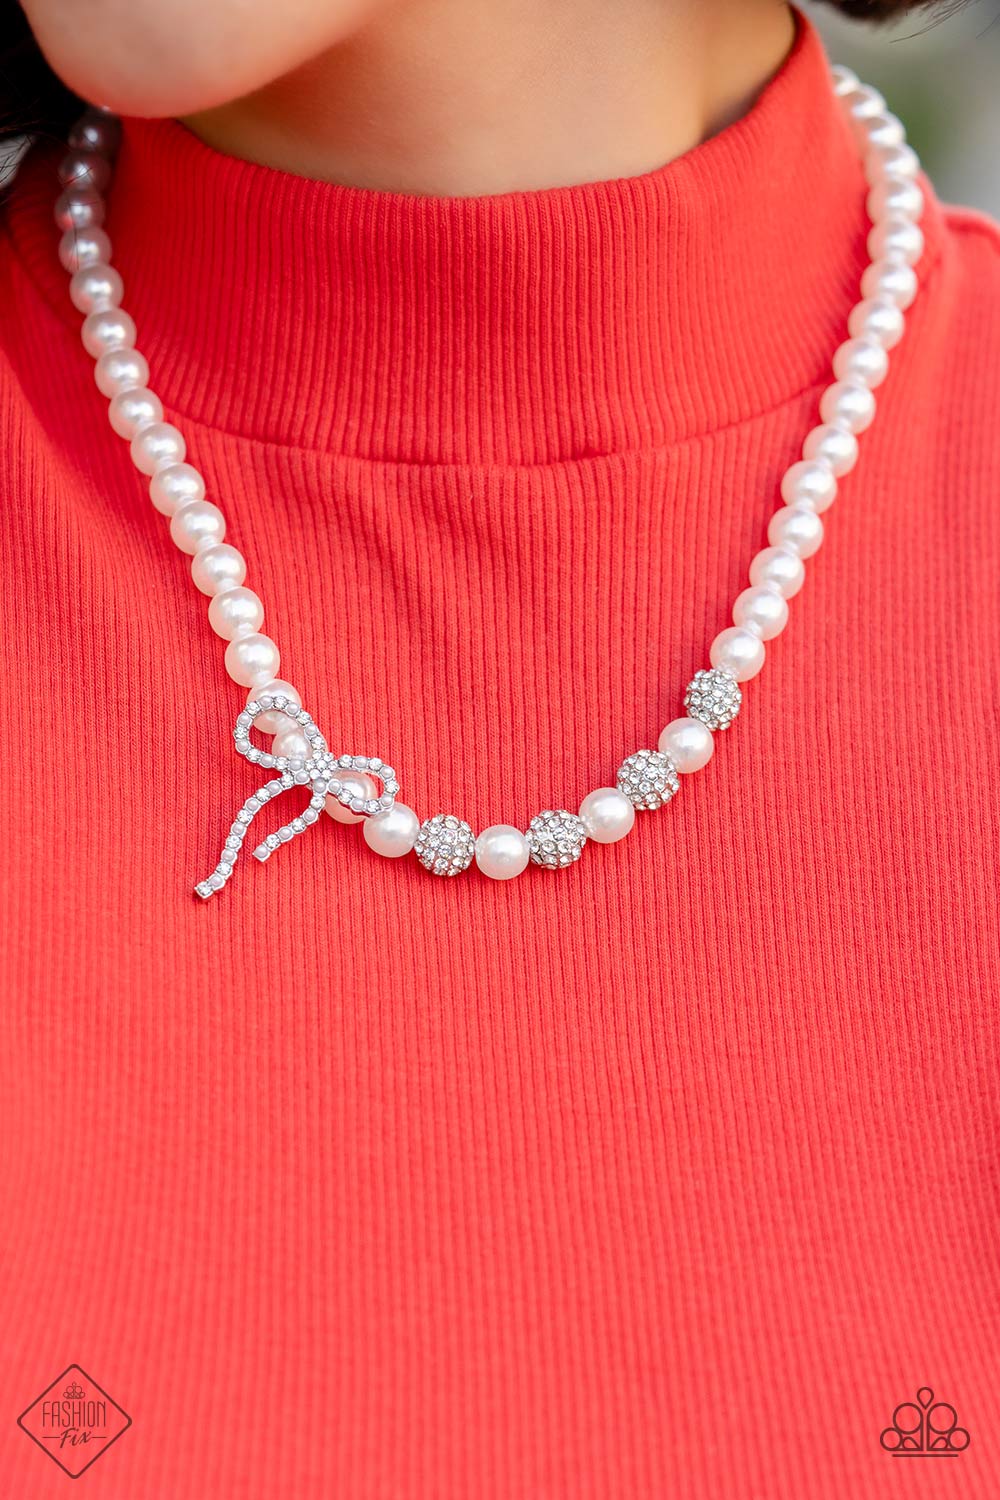 Classy Cadenza White Pearl Necklace - Paparazzi Accessories  A strand of classic white pearls coalesces down the neckline in a feminine display. Airy silver spheres, adorned in sparkling white rhinestones, are effortlessly sprinkled among the sea of pearls on one side, infusing the design with capricious shimmer. Then in the perfect finishing touch, a ribbon of silver, adorned in tiny white pearls and sparkling white rhinestones, loops into a bow at the bottom of the design.